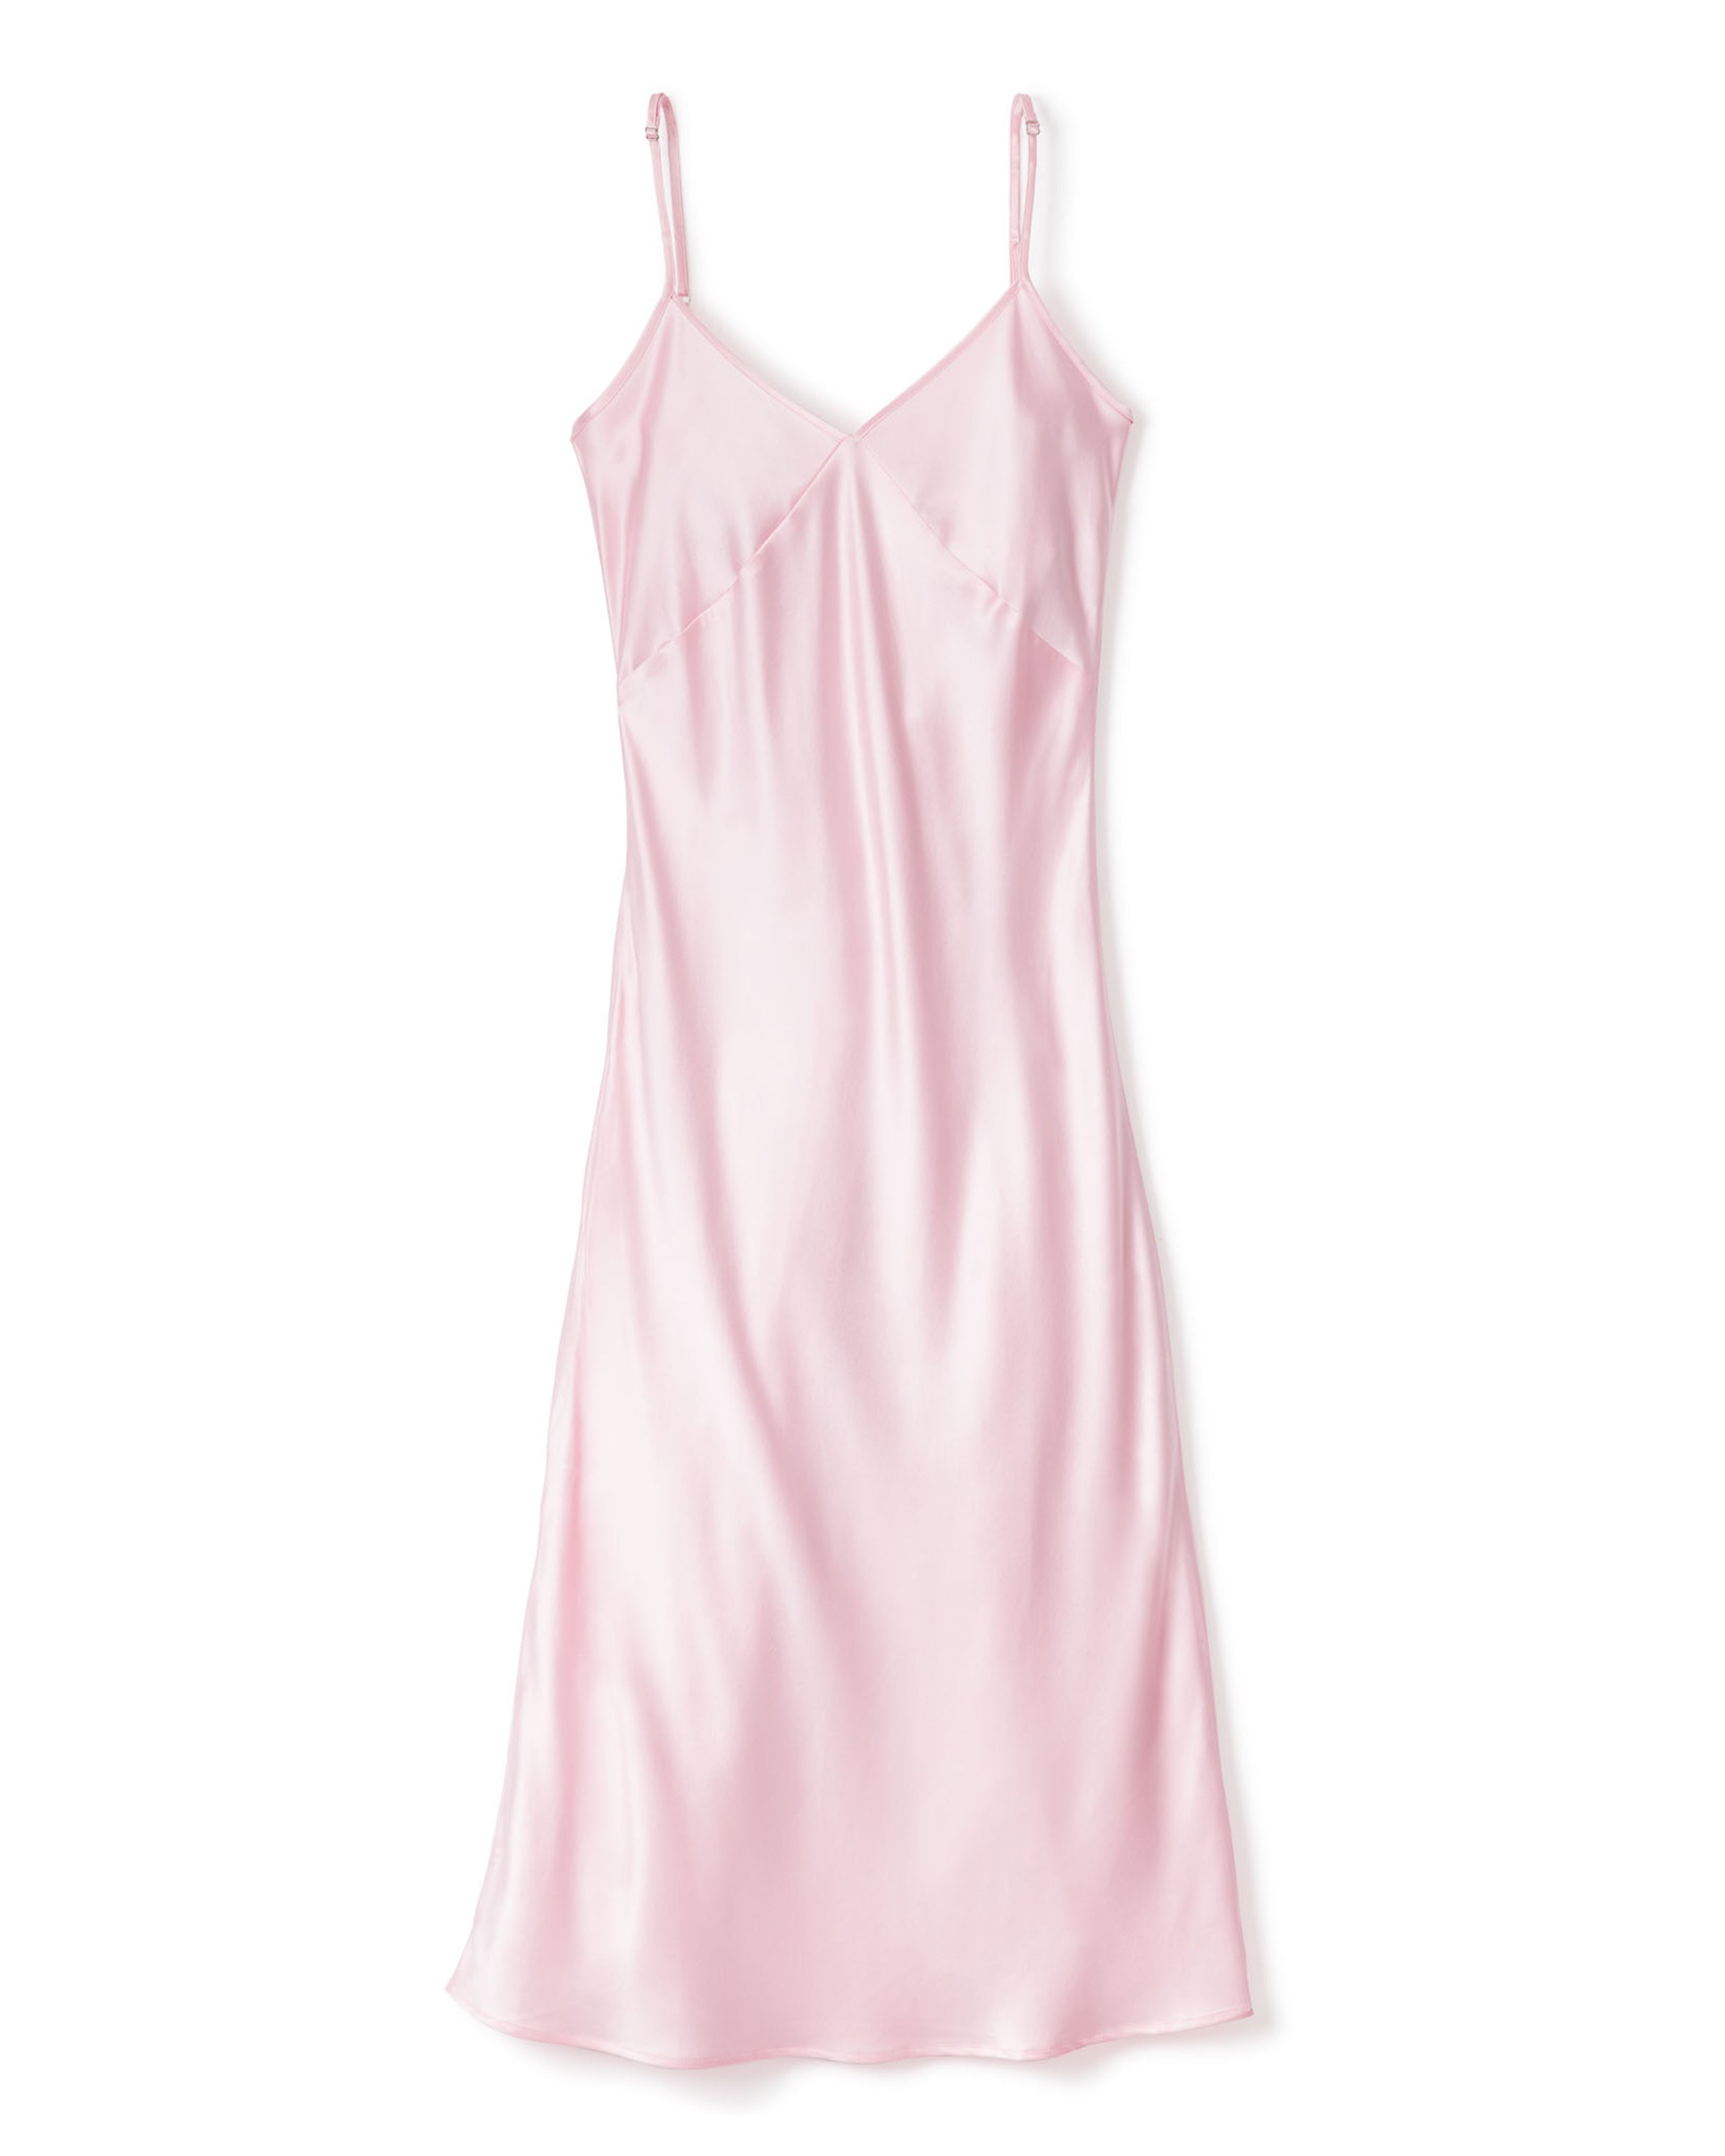 Satin Nightie with matching Robe – Box Boutique Collection